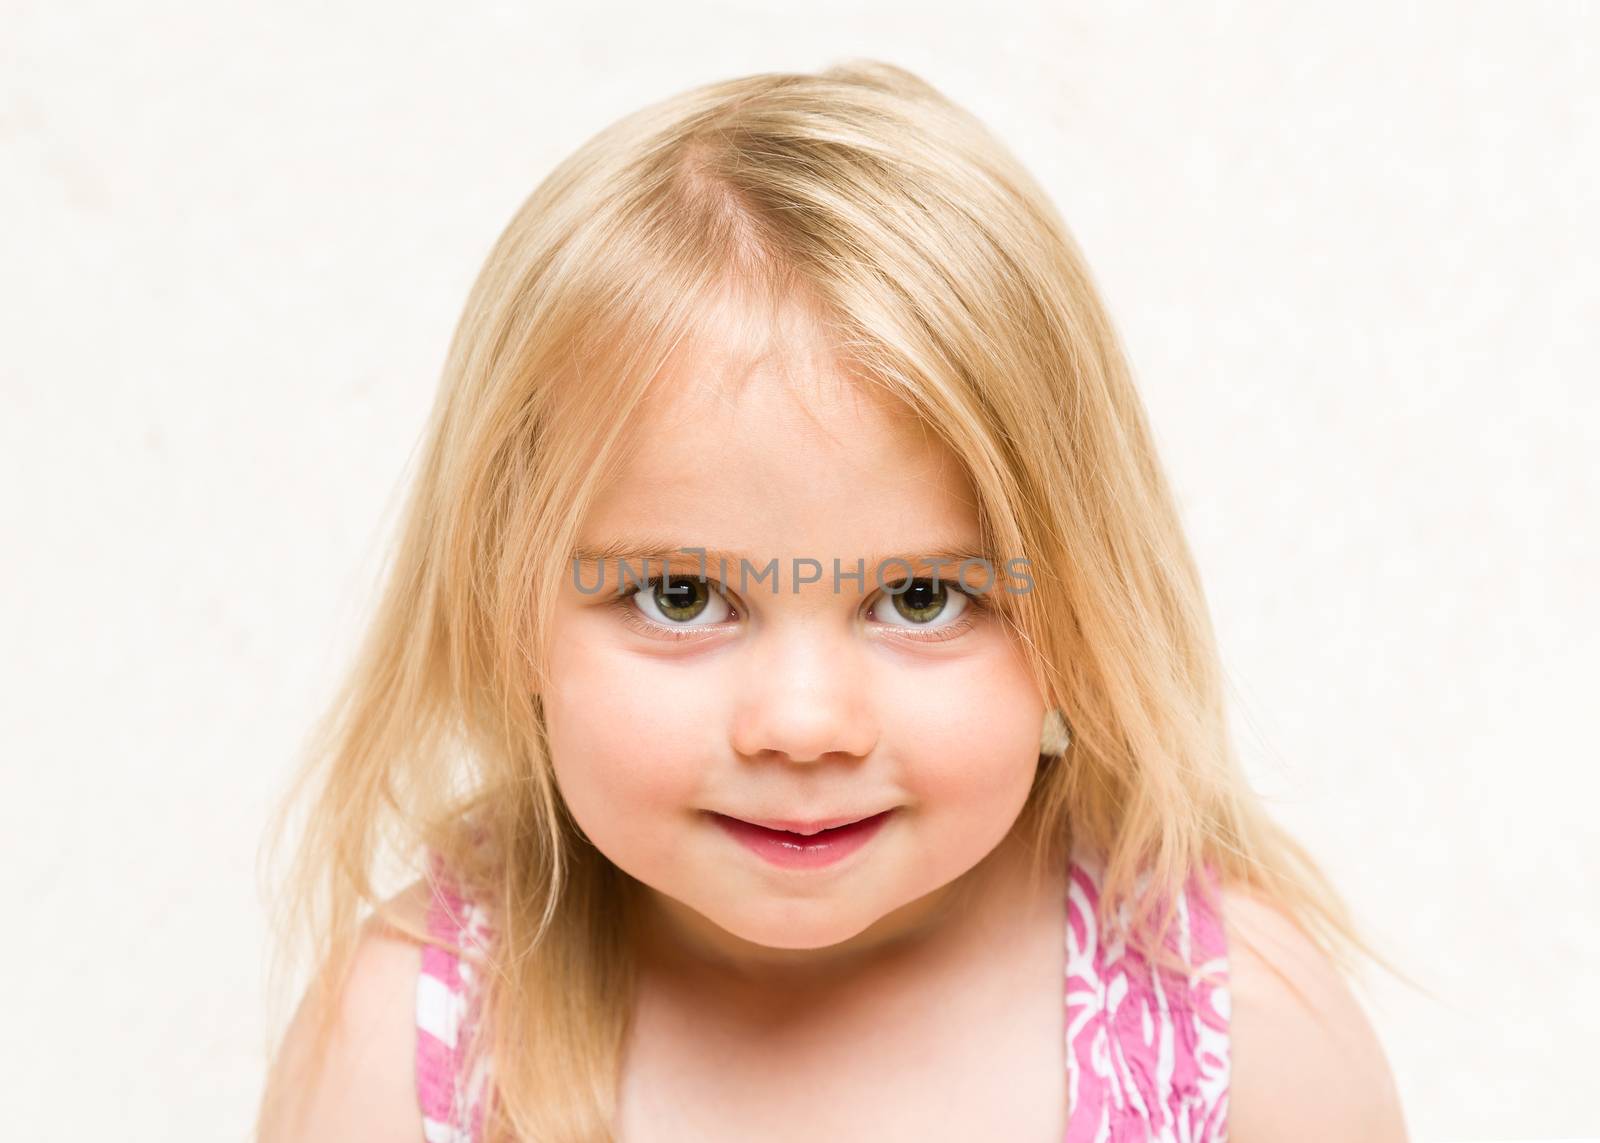 Closeup portrait of beautiful blonde toddler baby girl with cheeky grin